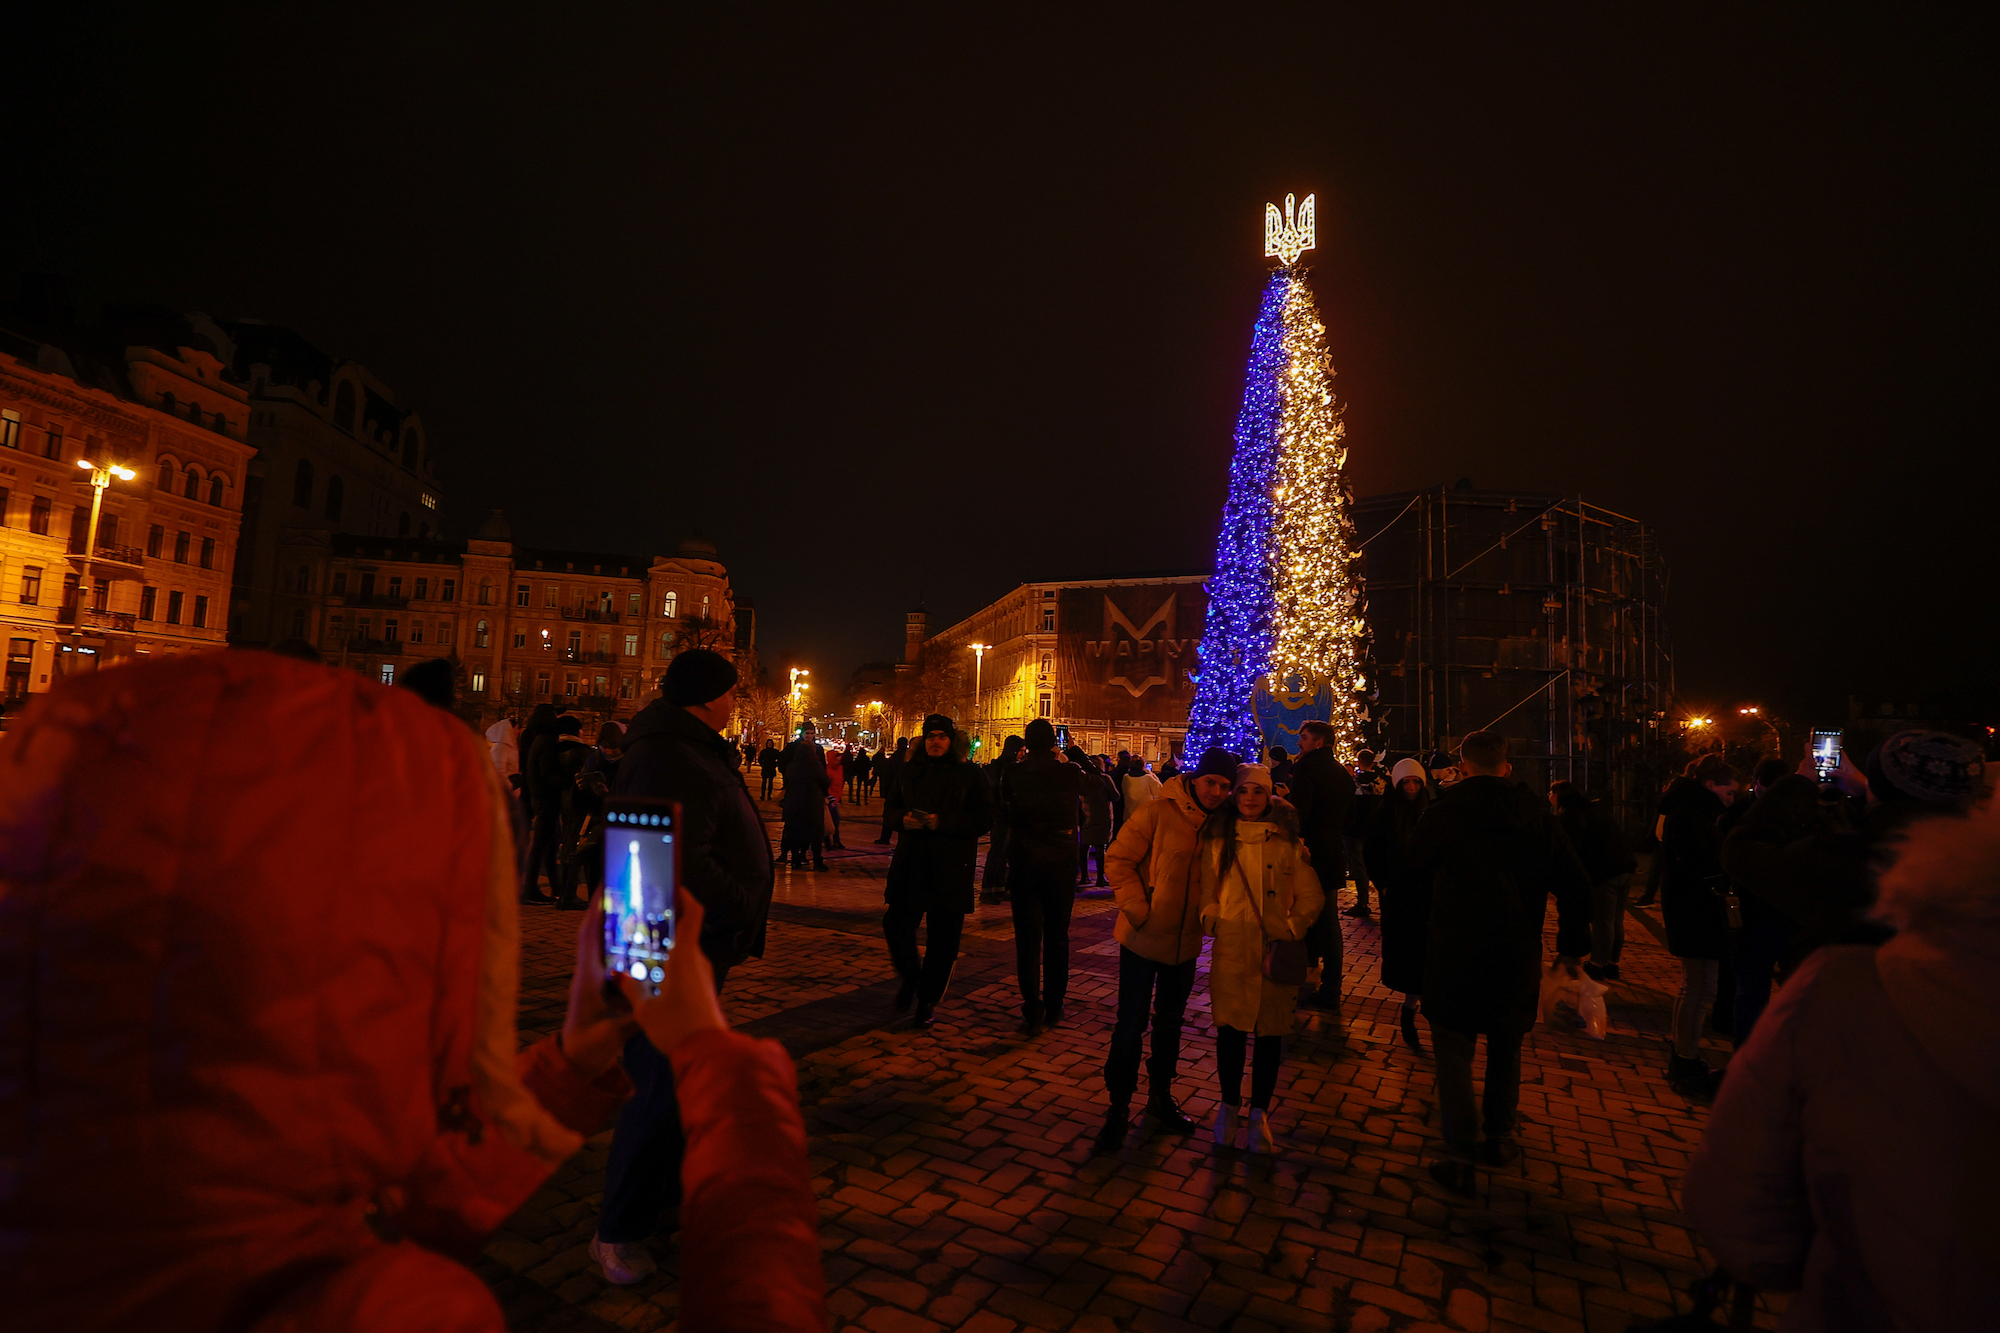 People take photos in front of the recently-illuminated Christmas tree at Sophia Square in Kyiv on Sunday.